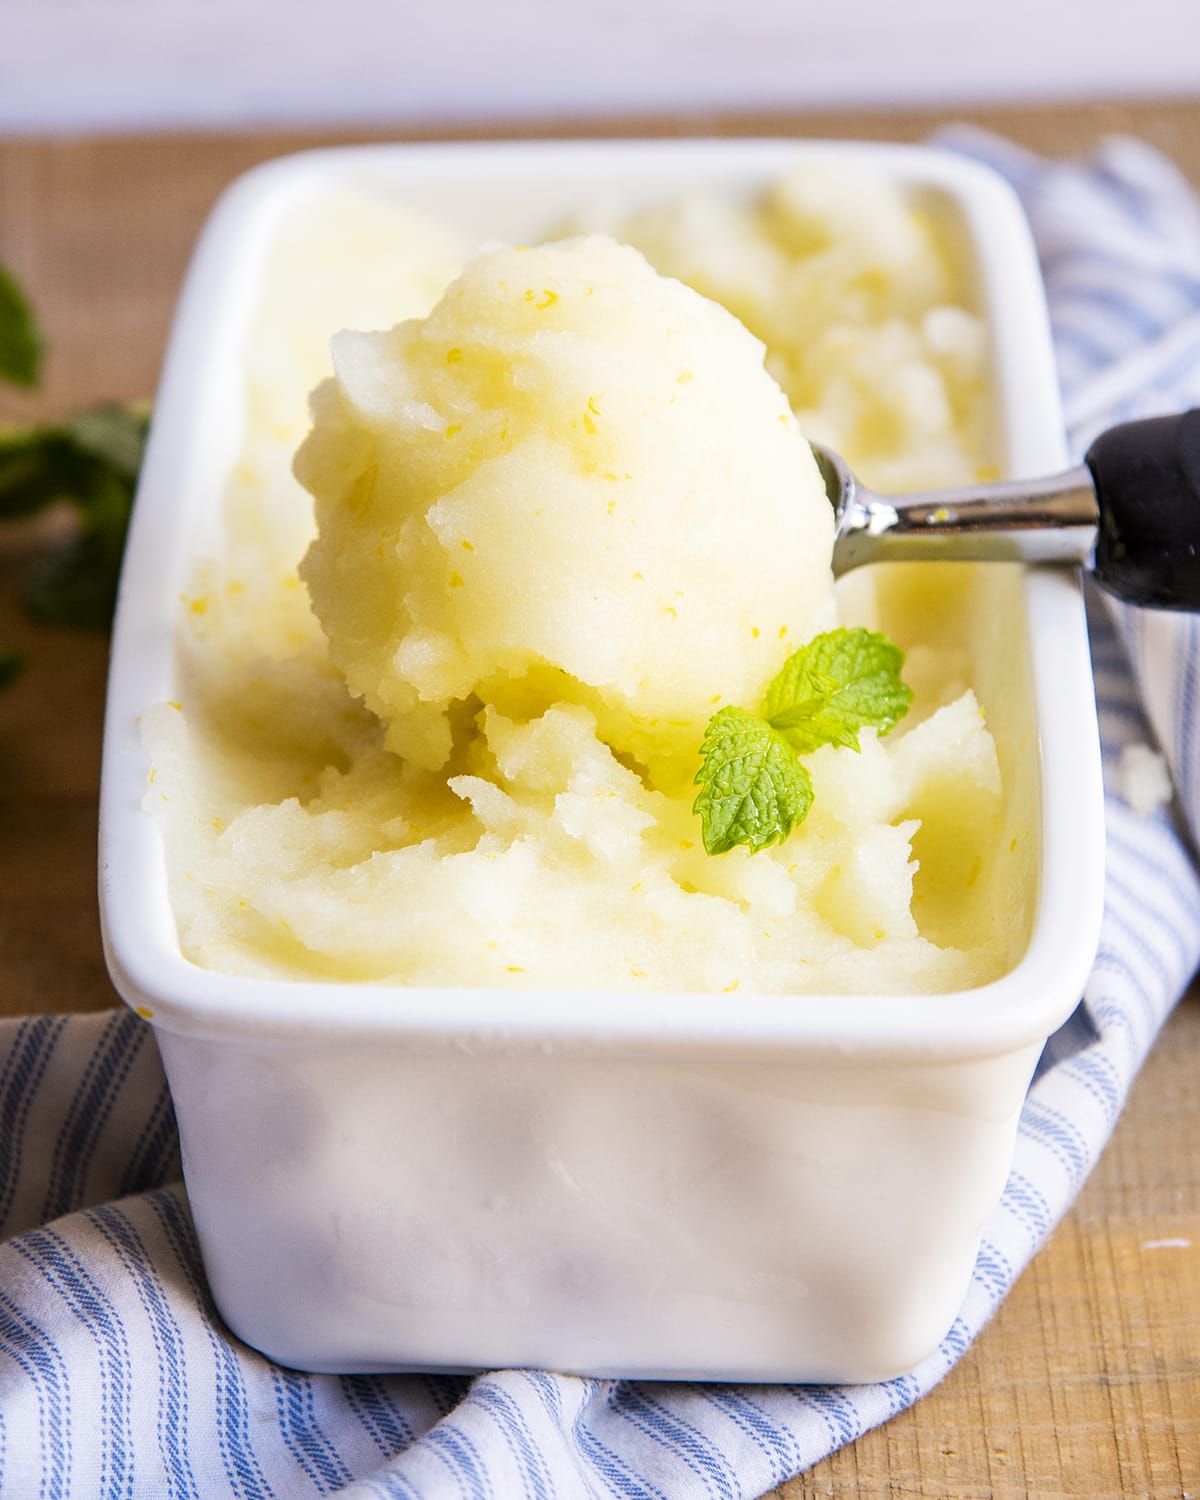 A large scoop of lemon sorbet with a mint leaf in front of it in a container.